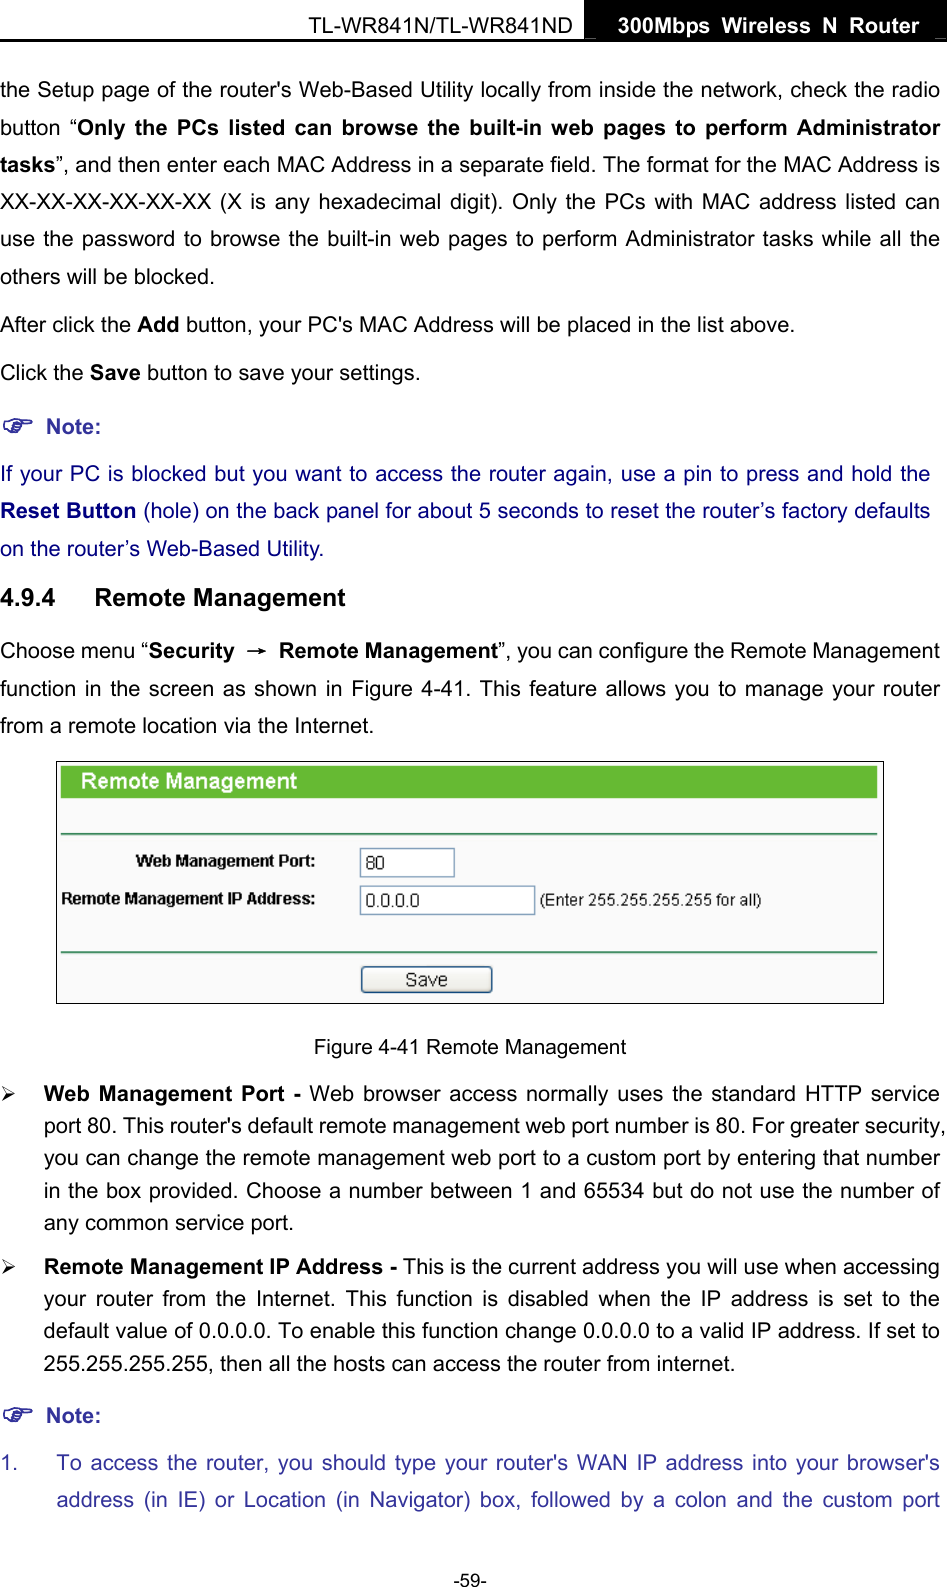   300Mbps Wireless N Router TL-WR841N/TL-WR841ND -59- the Setup page of the router&apos;s Web-Based Utility locally from inside the network, check the radio button “Only the PCs listed can browse the built-in web pages to perform Administrator tasks”, and then enter each MAC Address in a separate field. The format for the MAC Address is XX-XX-XX-XX-XX-XX (X is any hexadecimal digit). Only the PCs with MAC address listed can use the password to browse the built-in web pages to perform Administrator tasks while all the others will be blocked.   After click the Add button, your PC&apos;s MAC Address will be placed in the list above. Click the Save button to save your settings.   ) Note: If your PC is blocked but you want to access the router again, use a pin to press and hold the Reset Button (hole) on the back panel for about 5 seconds to reset the router’s factory defaults on the router’s Web-Based Utility. 4.9.4  Remote Management Choose menu “Security  → Remote Management”, you can configure the Remote Management function in the screen as shown in Figure 4-41. This feature allows you to manage your router from a remote location via the Internet.  Figure 4-41 Remote Management ¾ Web Management Port - Web browser access normally uses the standard HTTP service port 80. This router&apos;s default remote management web port number is 80. For greater security, you can change the remote management web port to a custom port by entering that number in the box provided. Choose a number between 1 and 65534 but do not use the number of any common service port.   ¾ Remote Management IP Address - This is the current address you will use when accessing your router from the Internet. This function is disabled when the IP address is set to the default value of 0.0.0.0. To enable this function change 0.0.0.0 to a valid IP address. If set to 255.255.255.255, then all the hosts can access the router from internet.   ) Note: 1.  To access the router, you should type your router&apos;s WAN IP address into your browser&apos;s address (in IE) or Location (in Navigator) box, followed by a colon and the custom port 